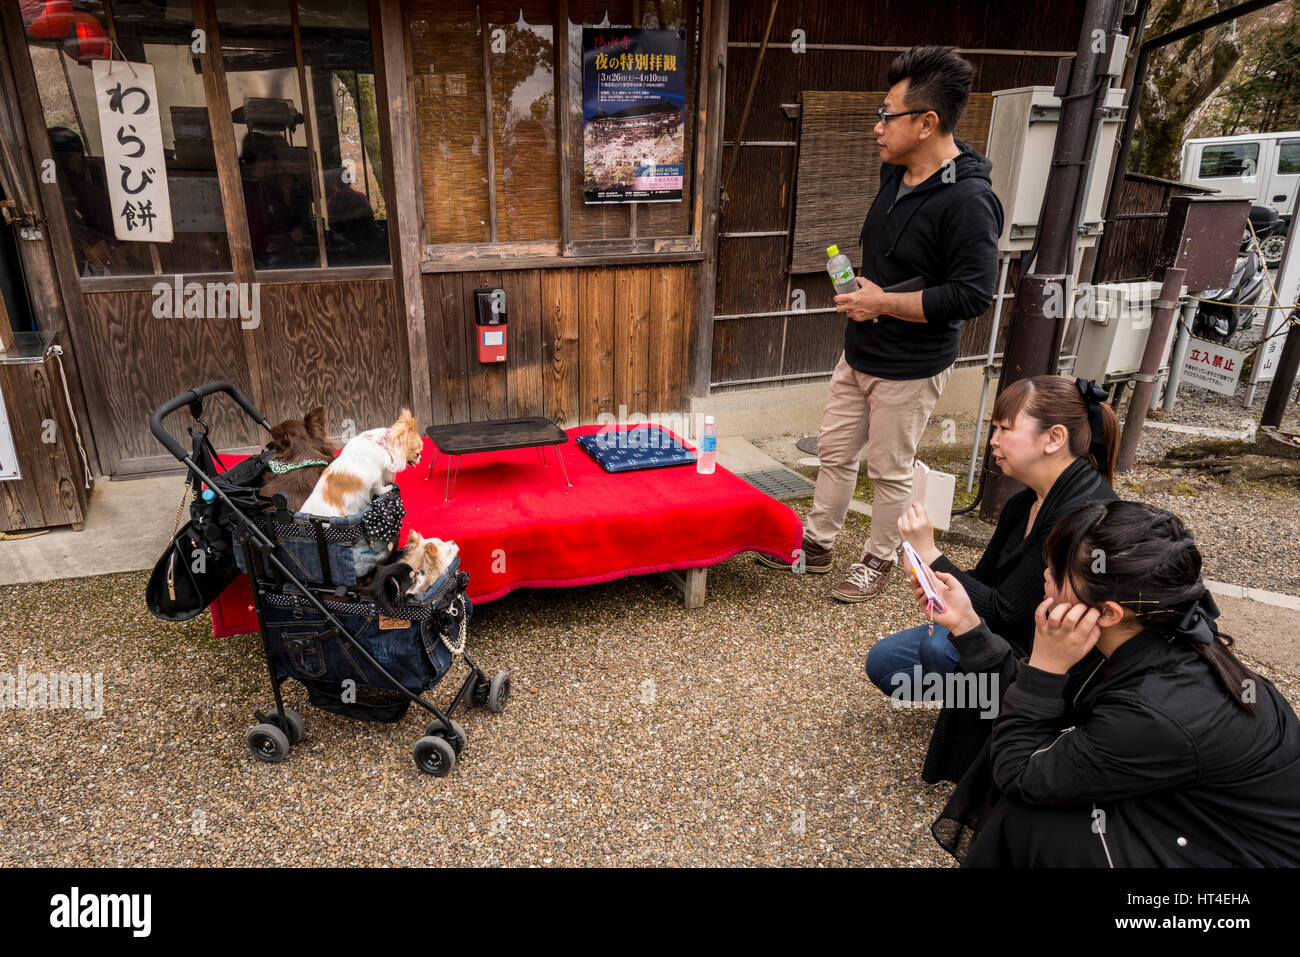 Eccentric Japanese with dogs in a pram and taking photos with their mobile phone, Japan Stock Photo